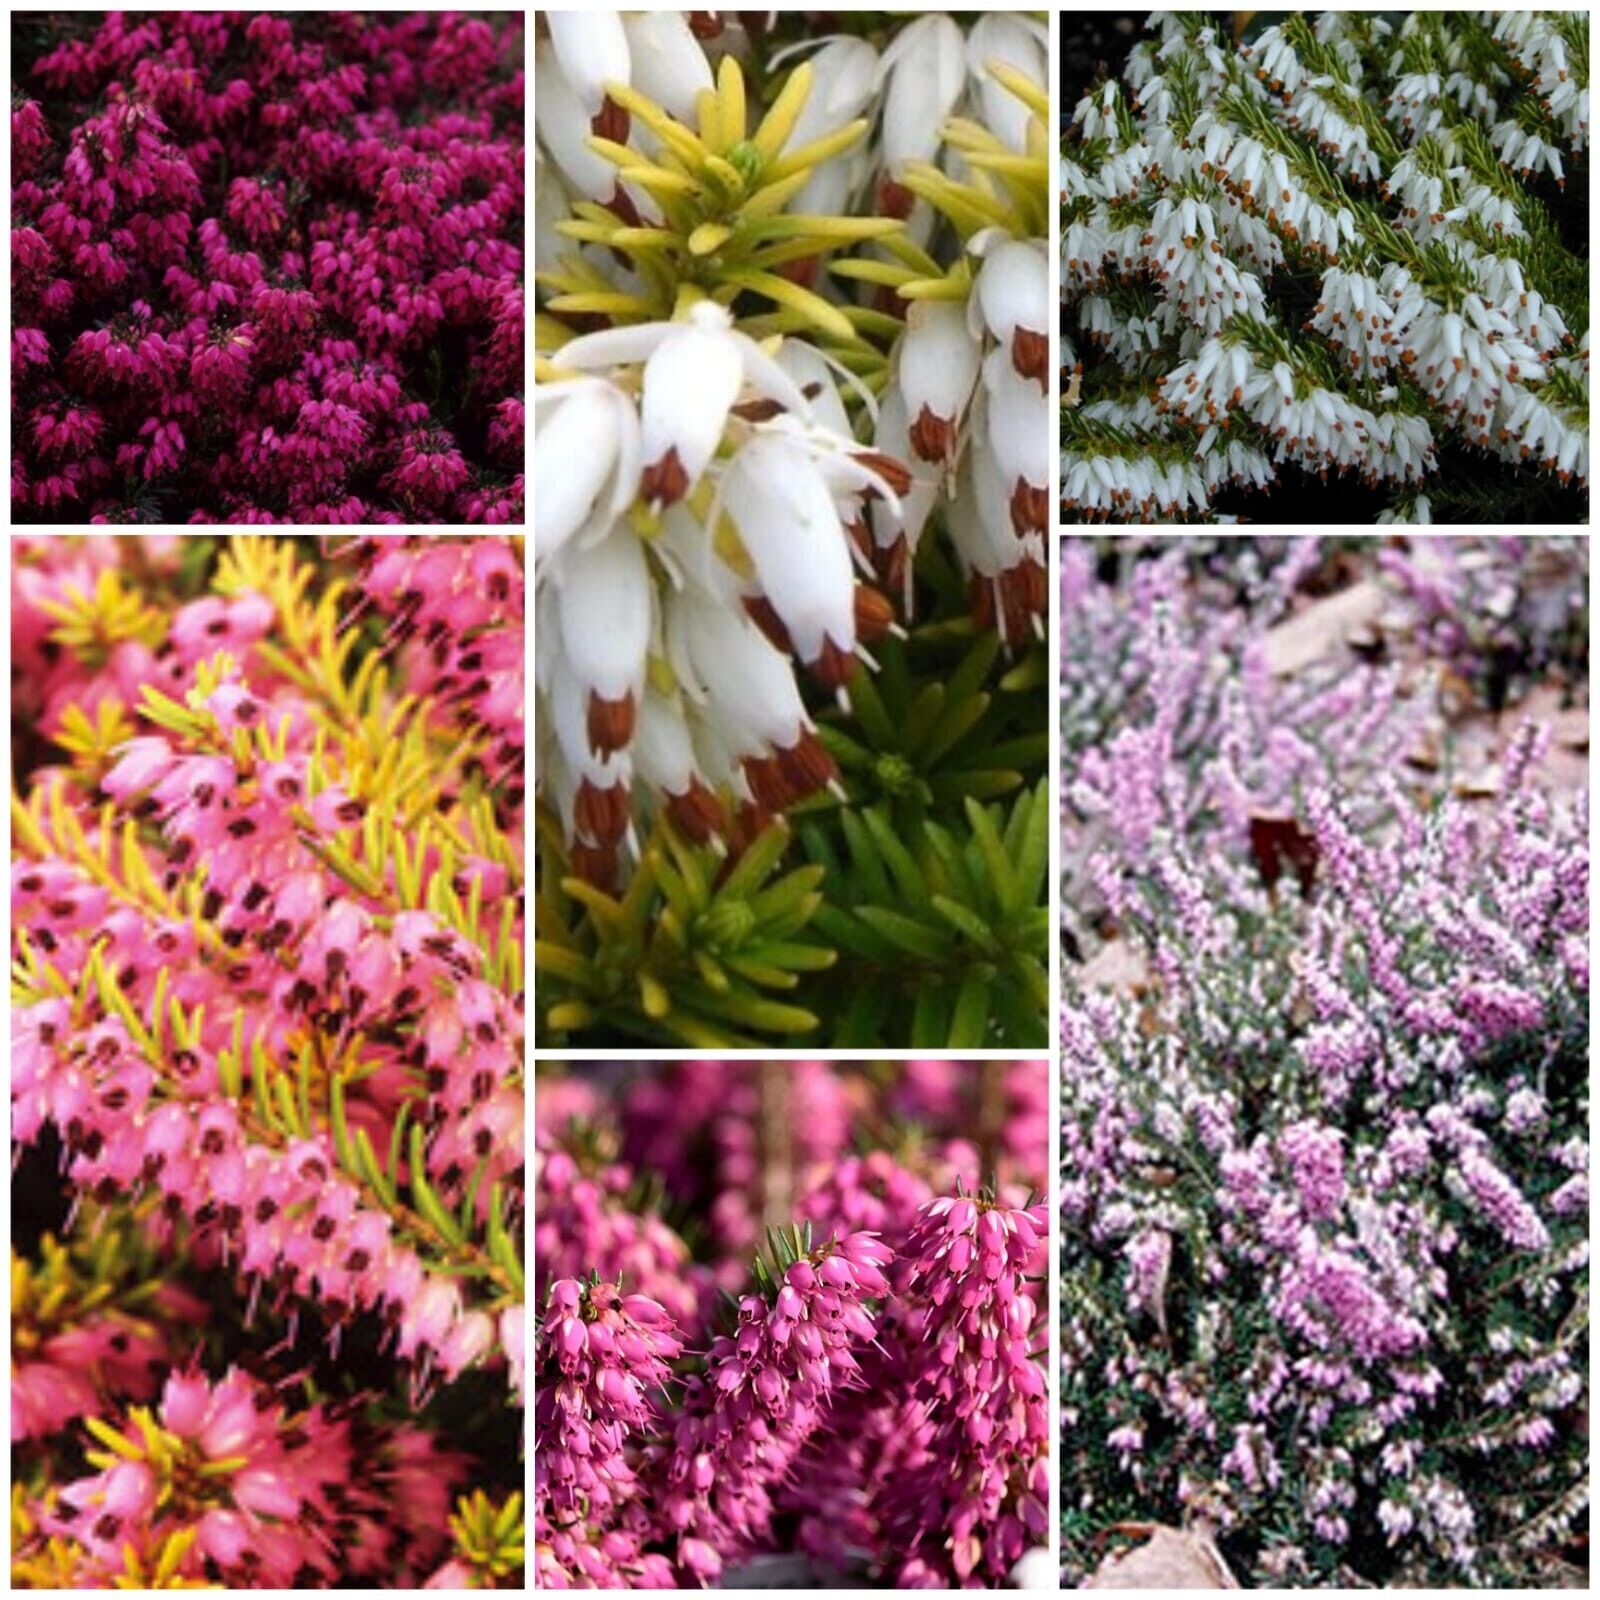 6 X MIXED WINTER HEATHERS COLOURFUL FLOWERING WINTER MIX PLANTS